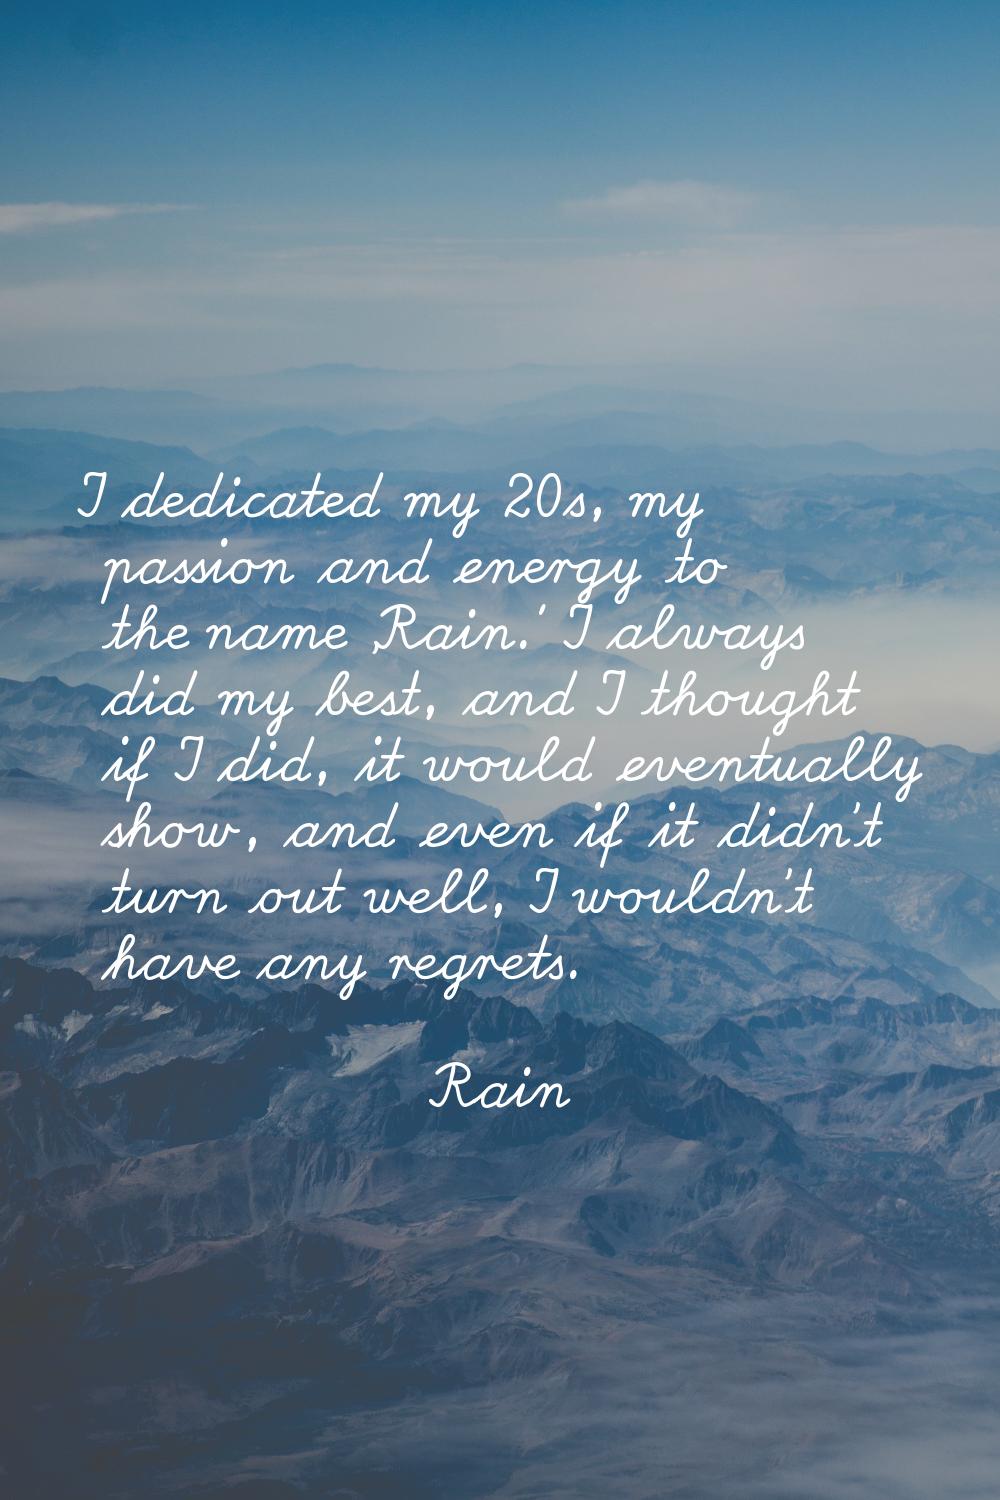 I dedicated my 20s, my passion and energy to the name 'Rain.' I always did my best, and I thought i